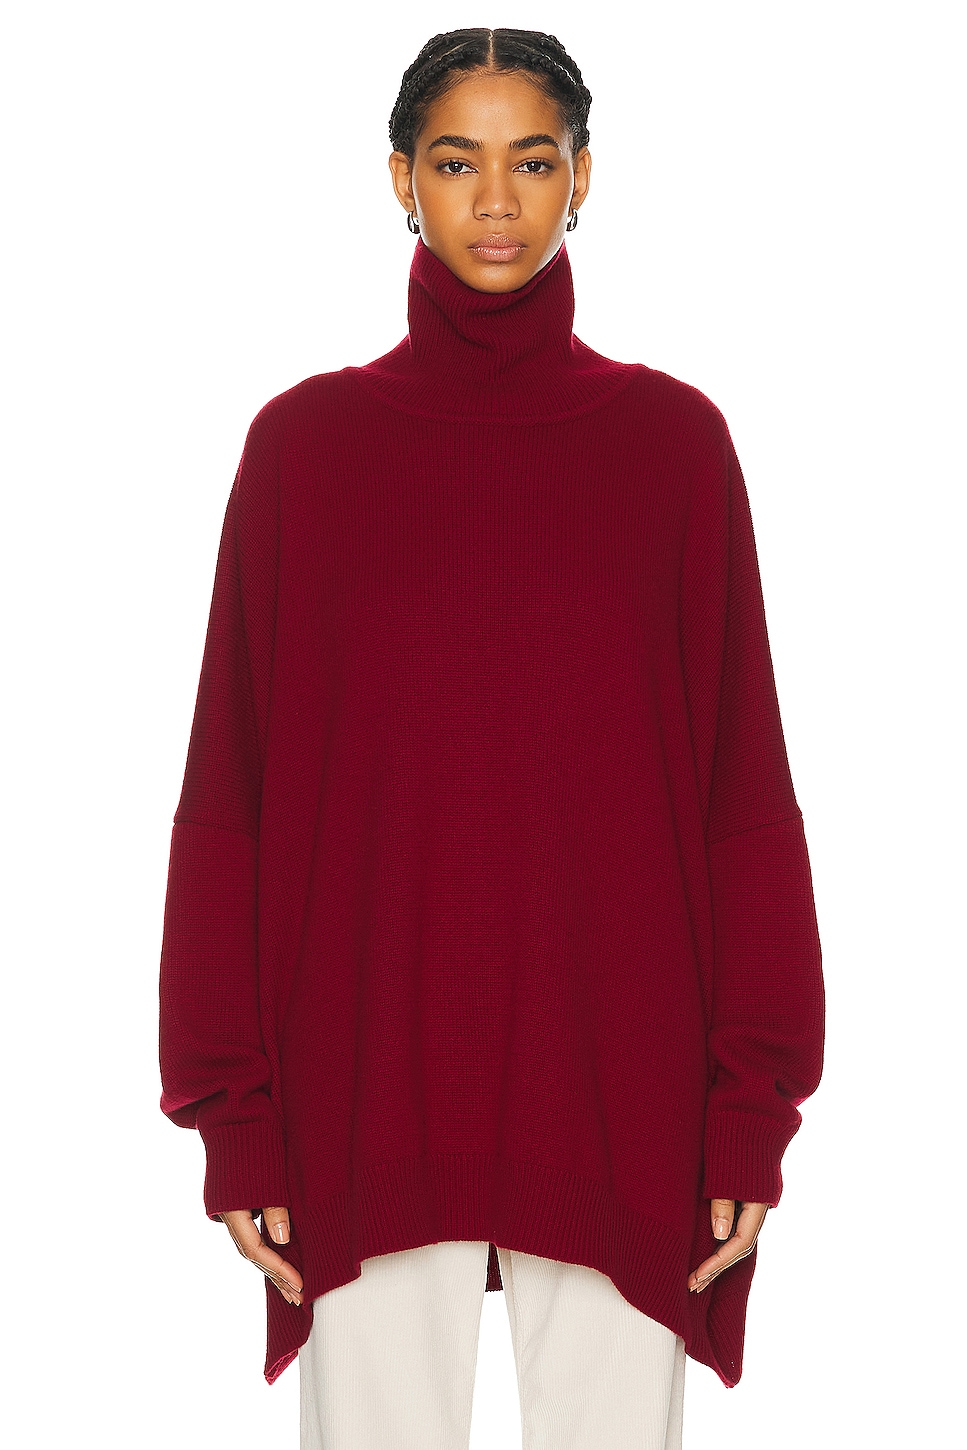 Image 1 of The Row Vinicius Top in Burgundy